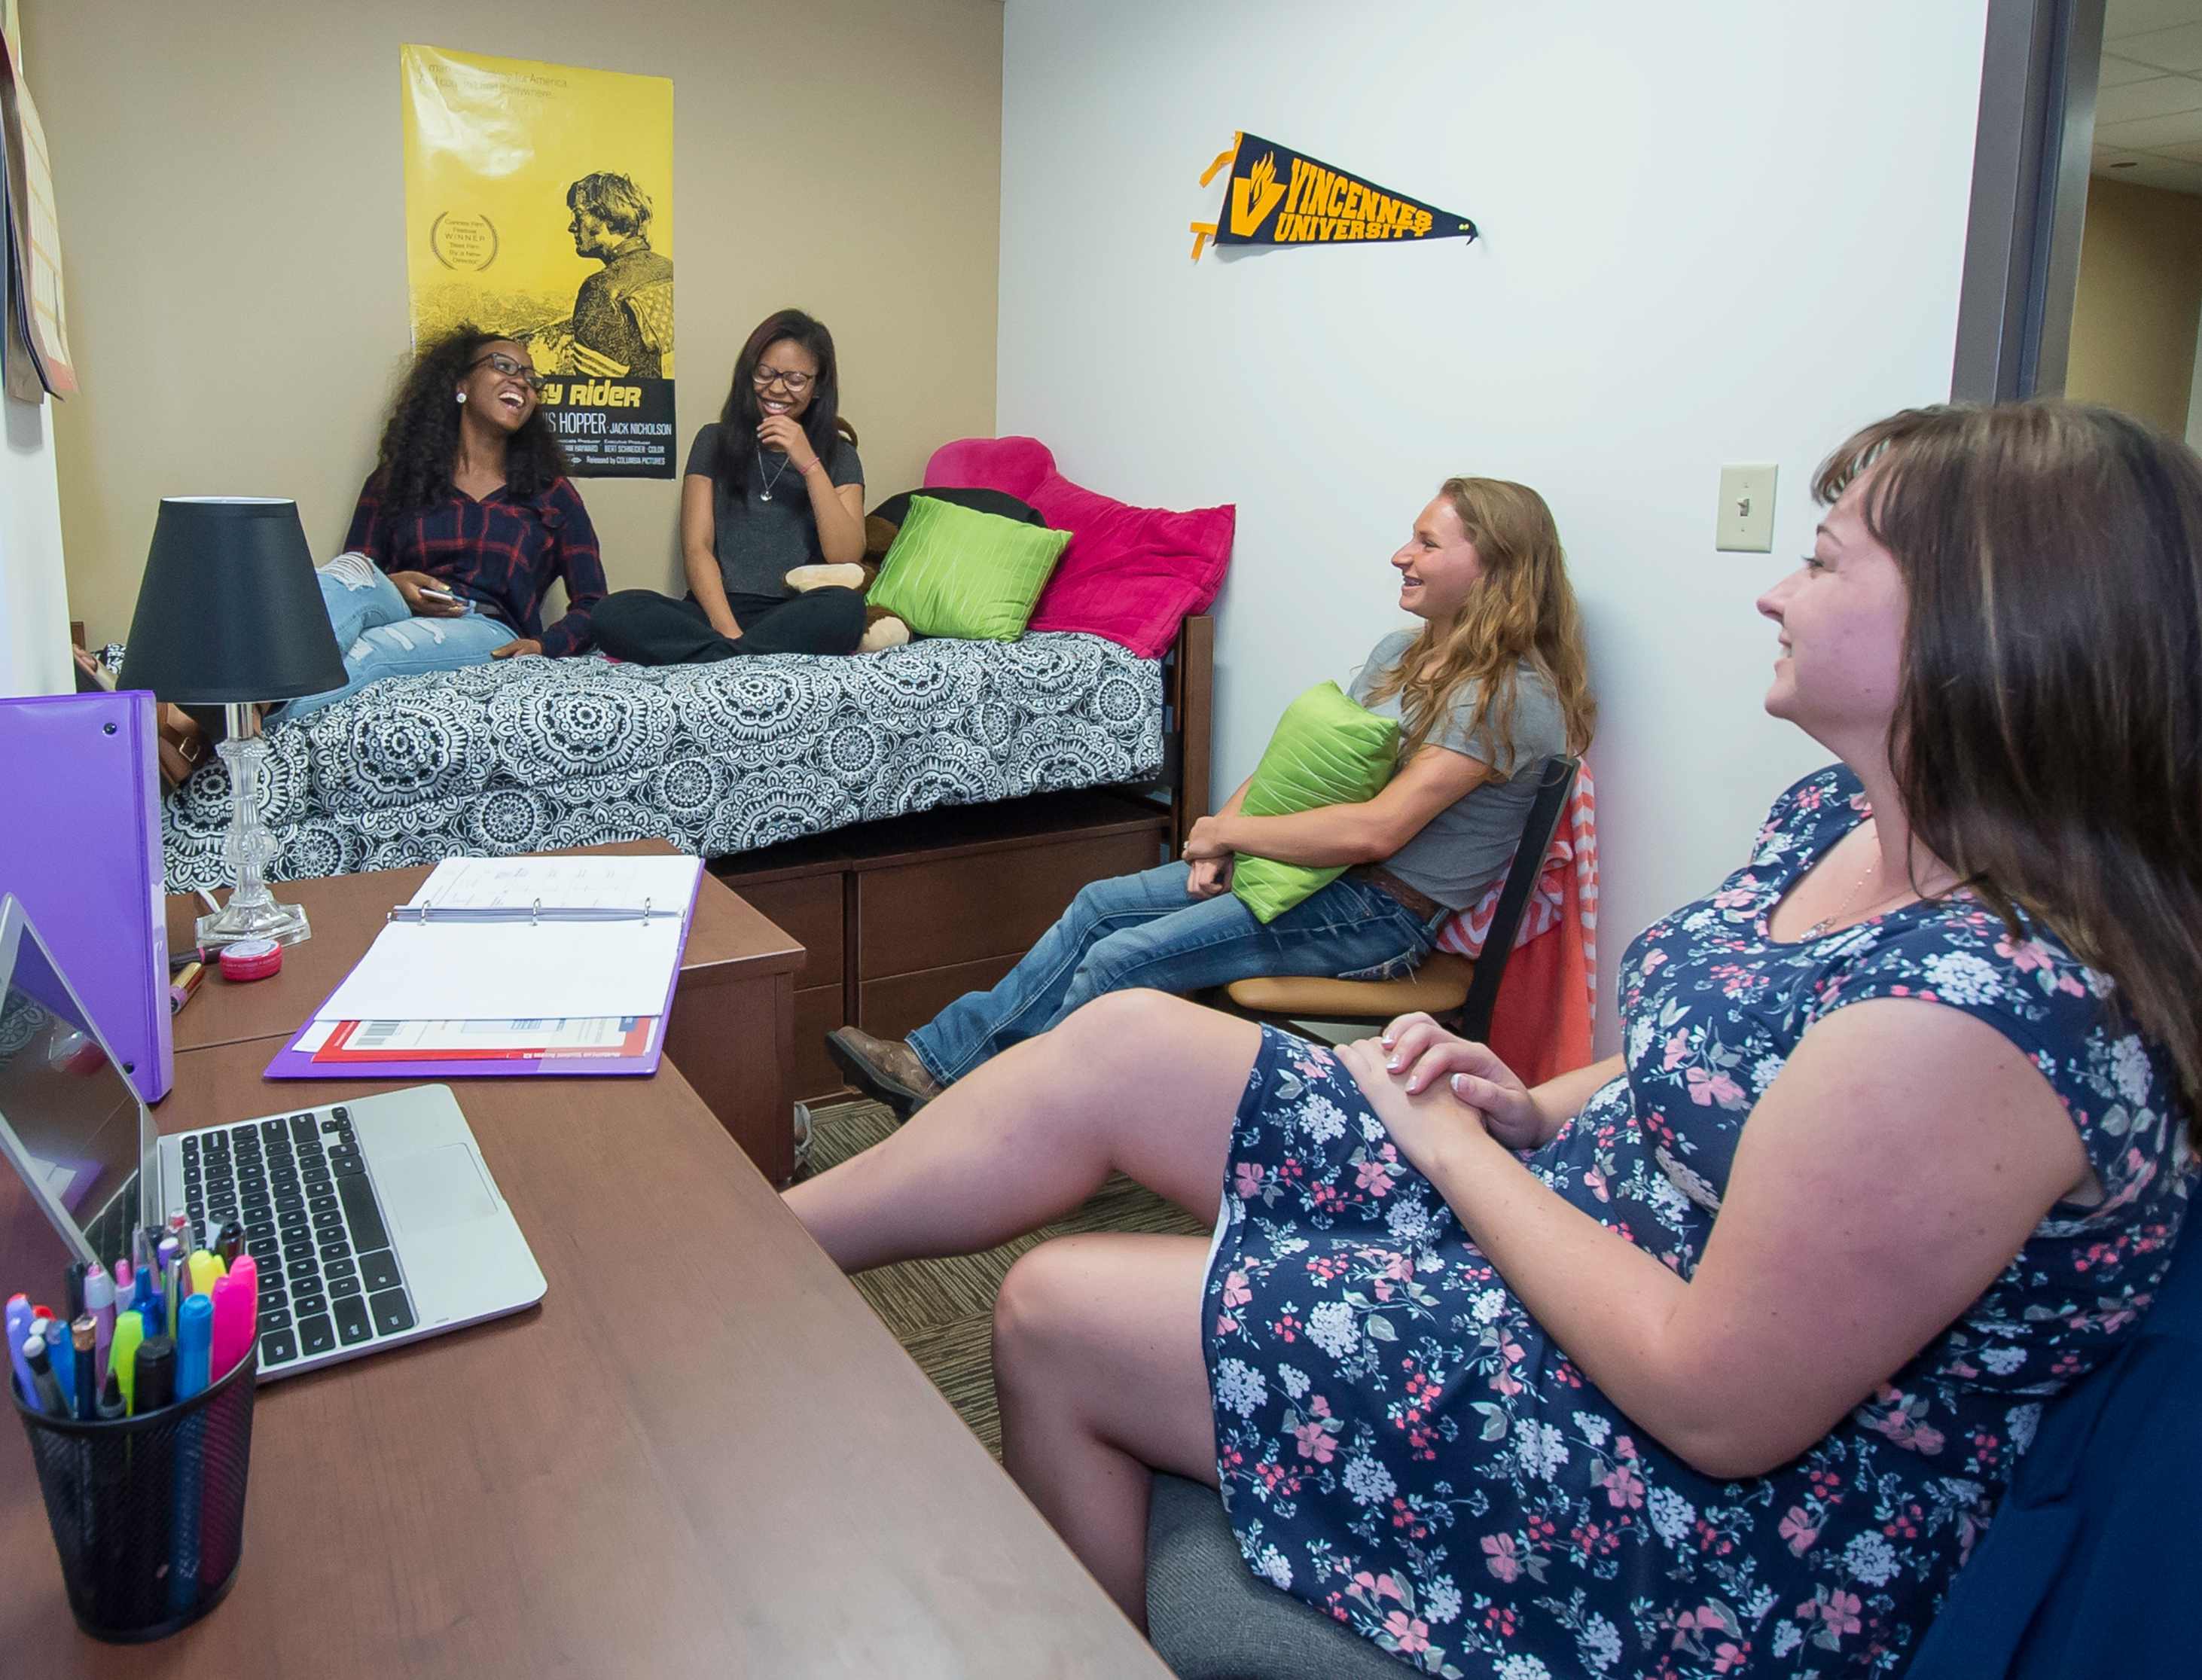 A diverse group of female students sit on beds and chairs laughing in VU residence hall room 